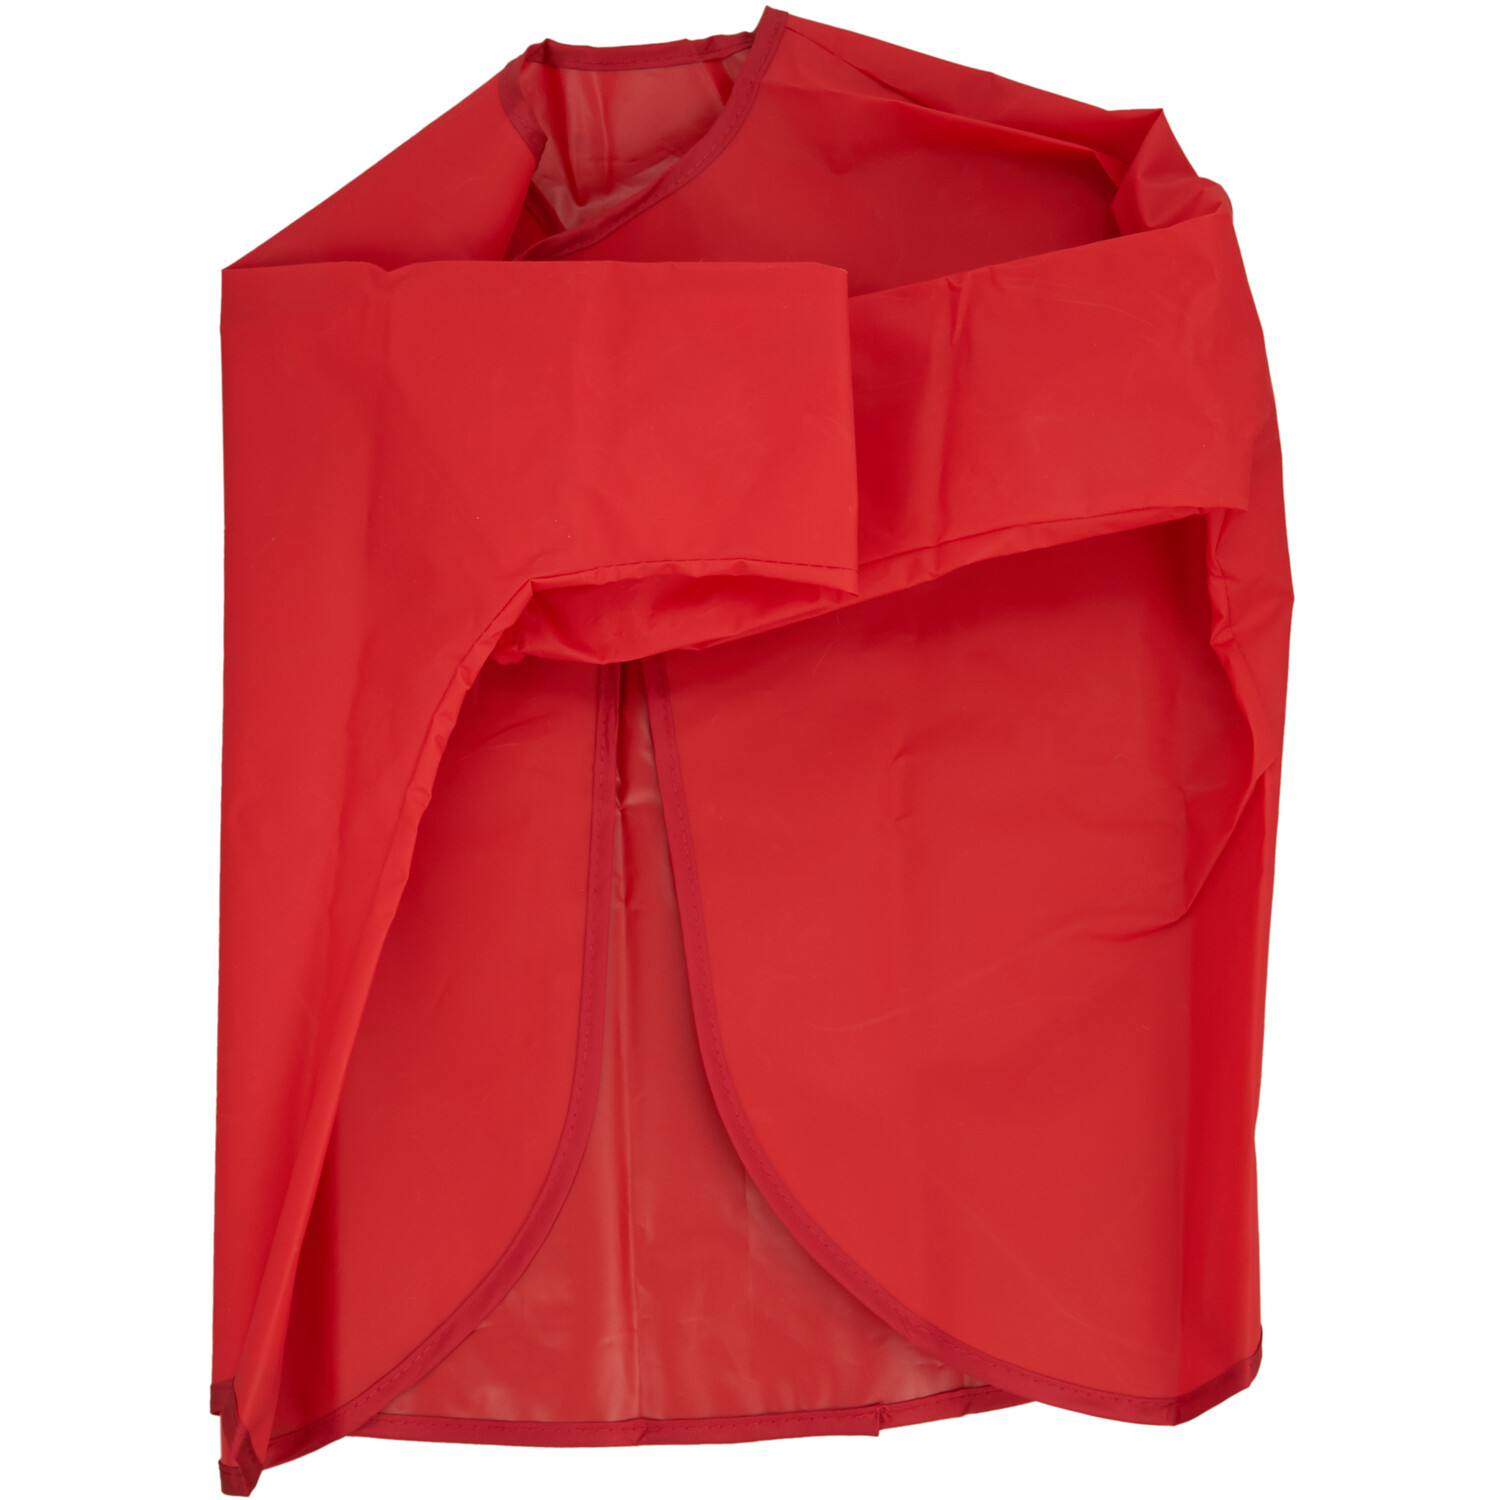 Kids Activity Apron - Red Image 1